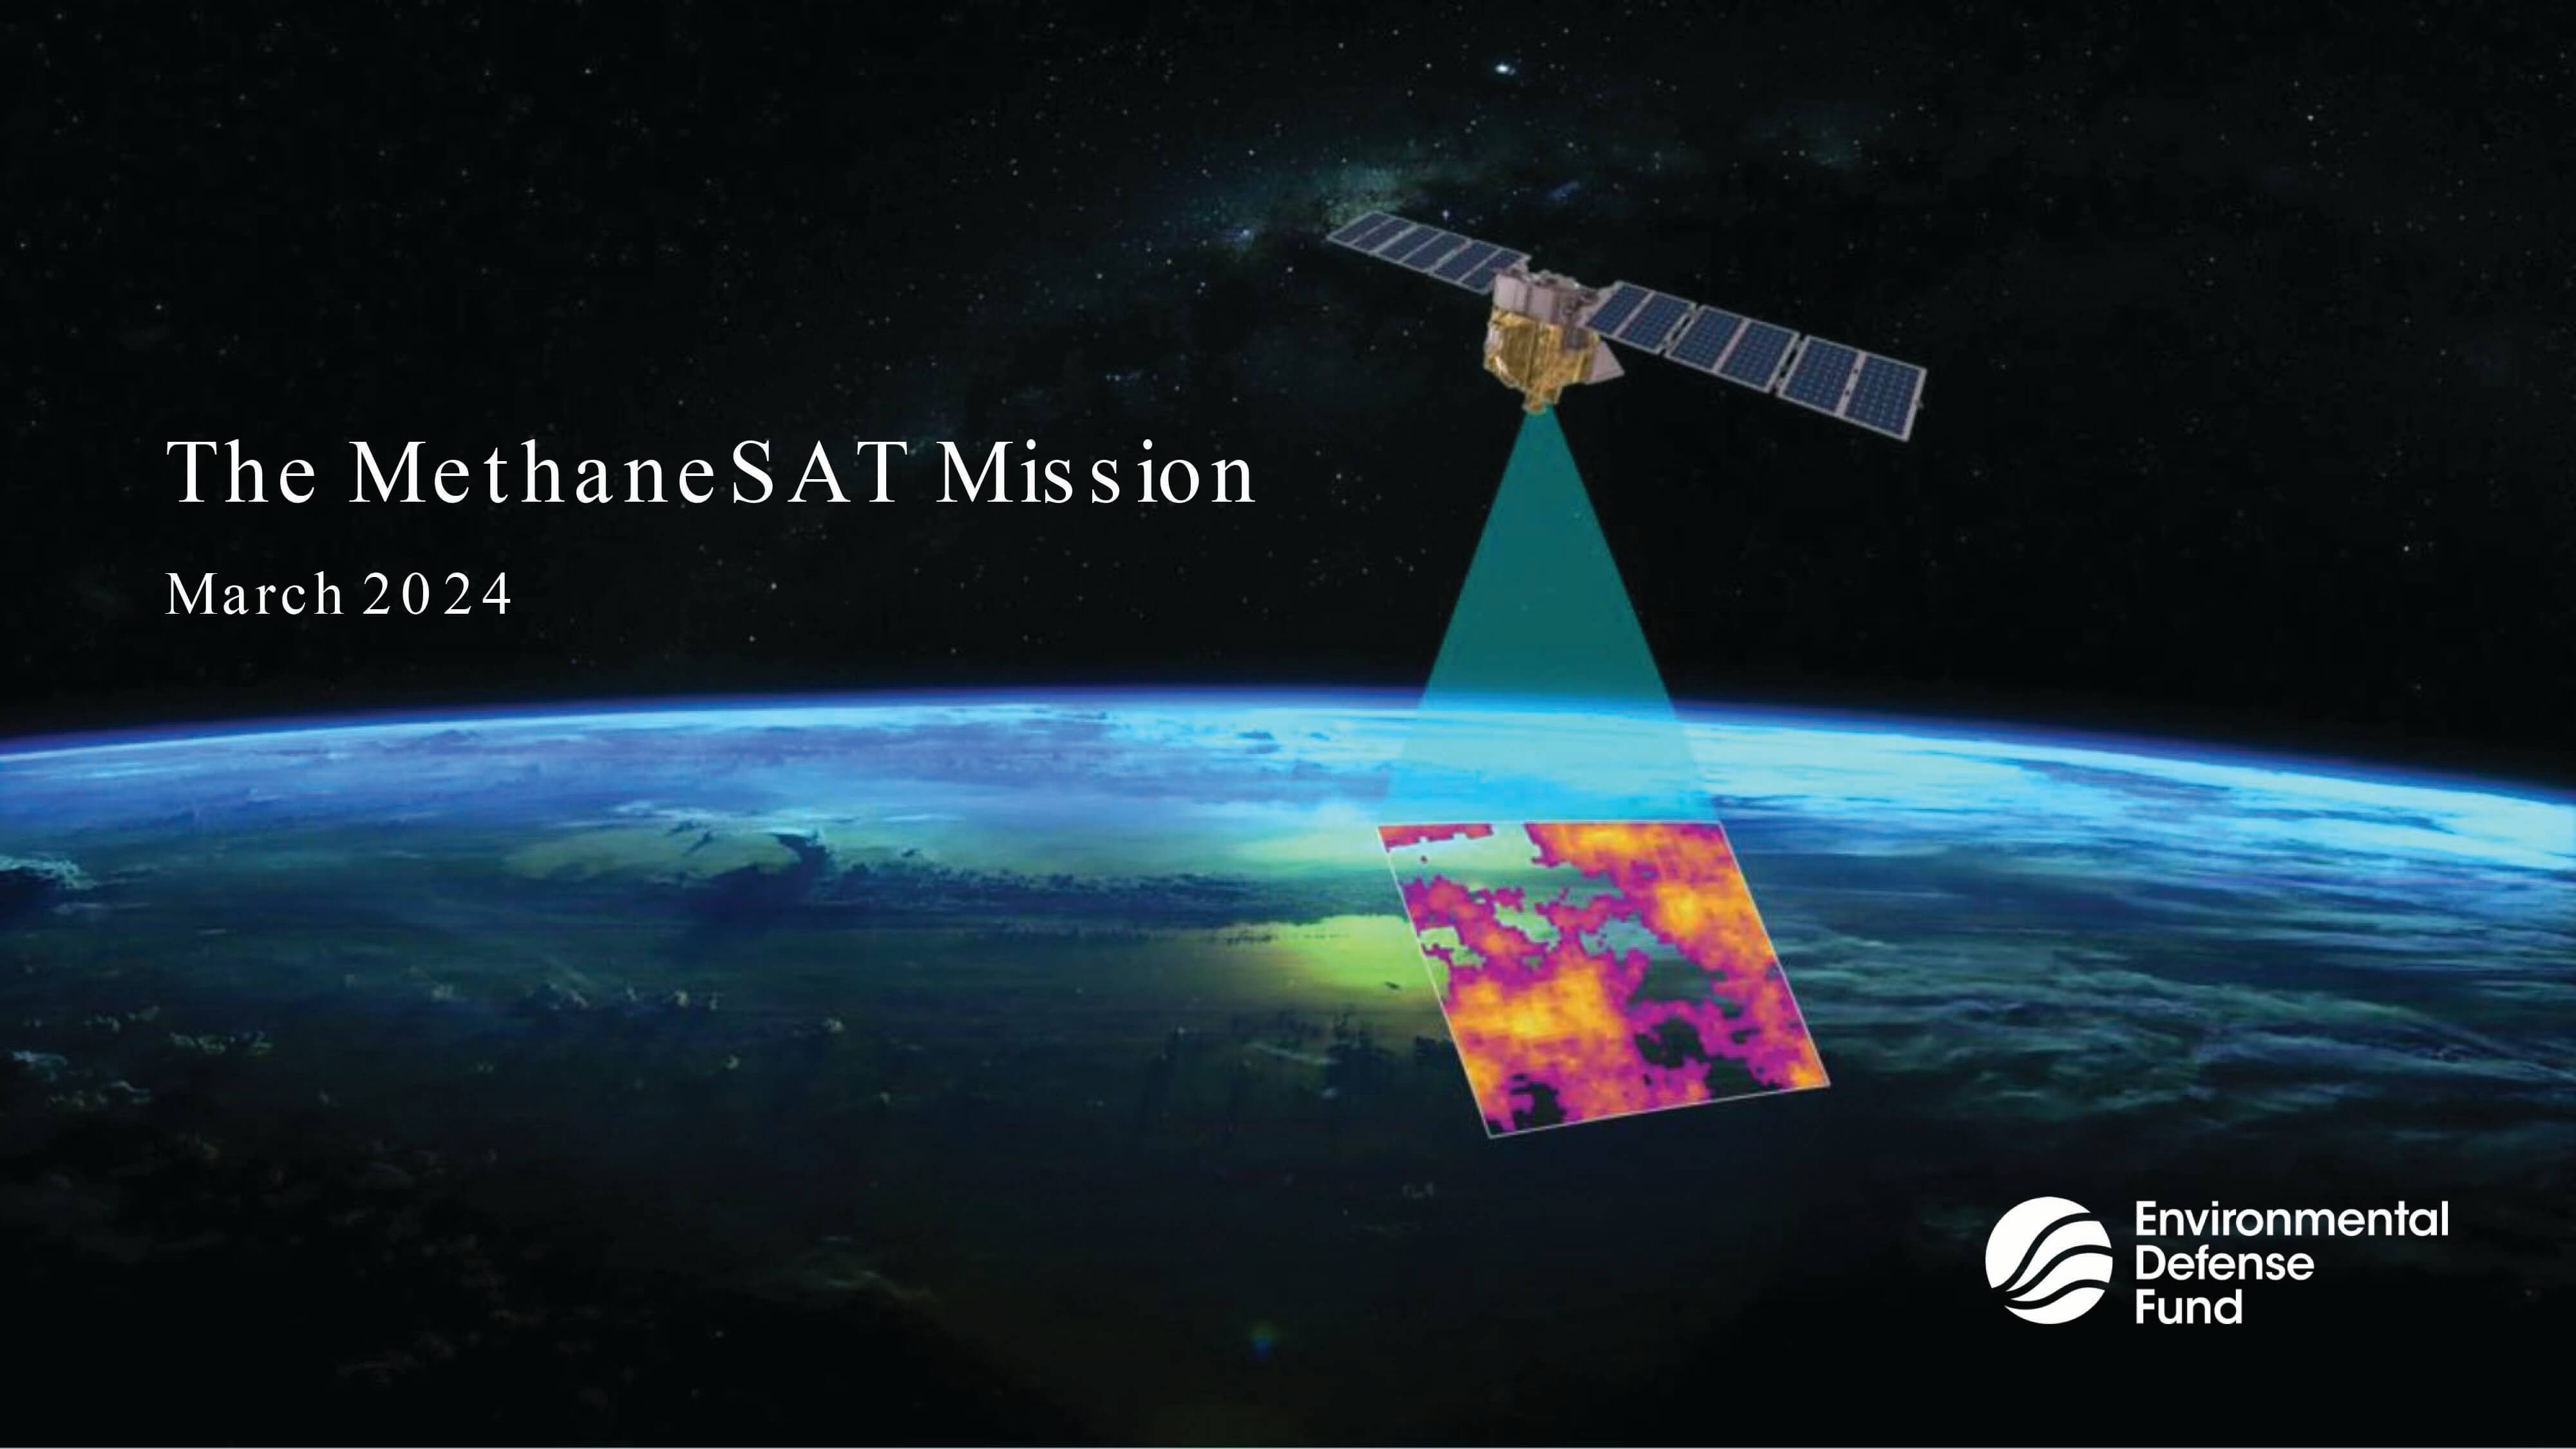 The MethaneSAT Mission